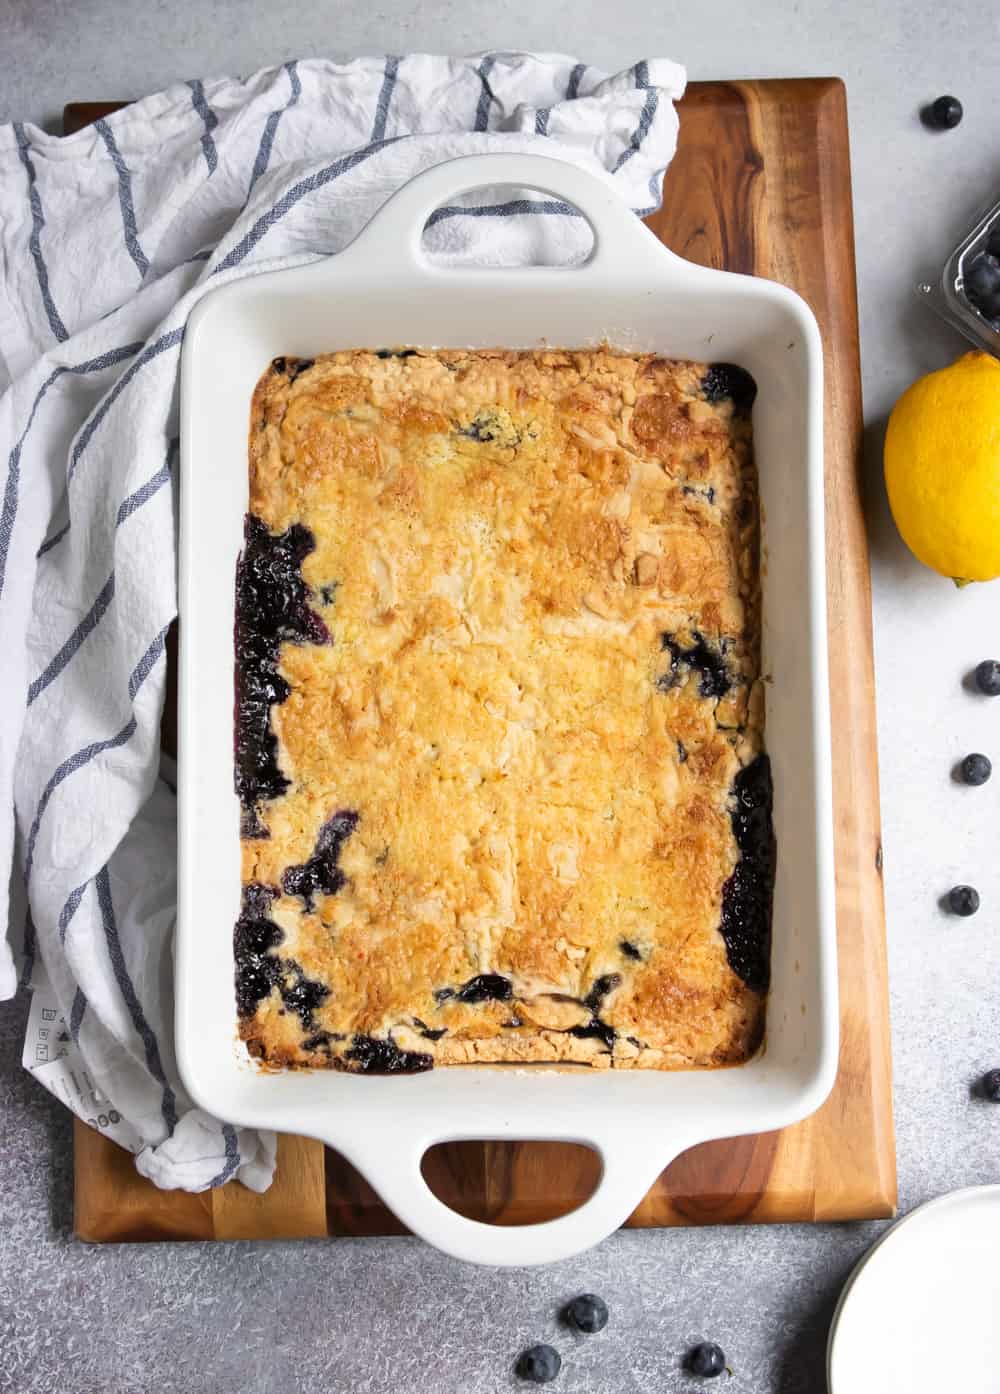 Overhead view of blueberry dump cake on wood board with napkin and lemons.